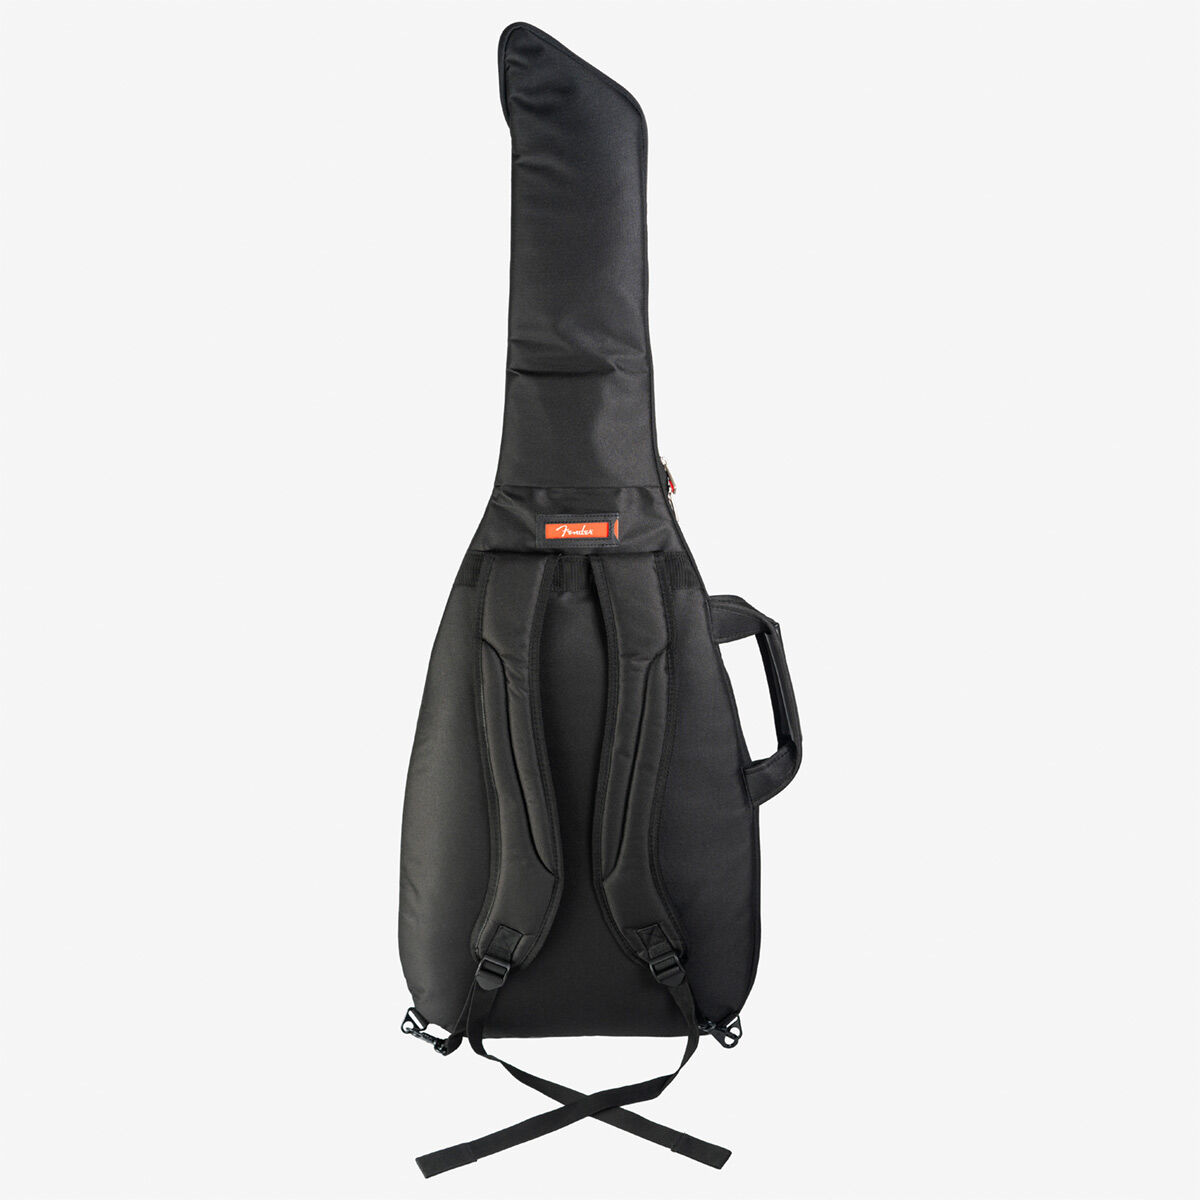 Levy's Leathers LM19-BLK - Levy's Leather Bass Guitar Bag - Black